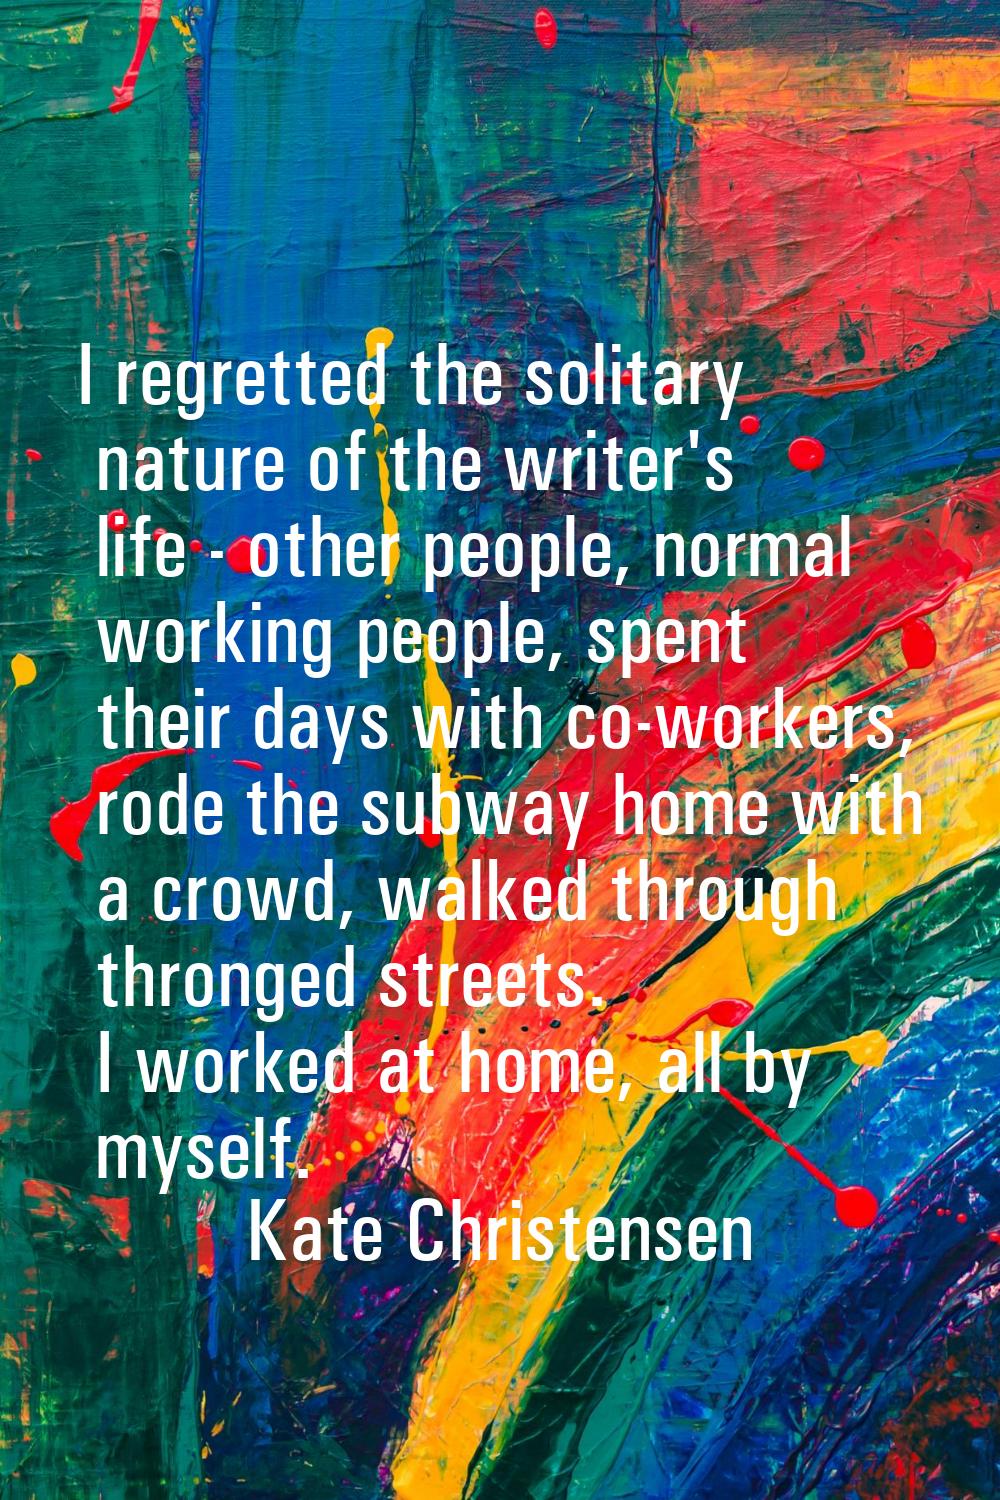 I regretted the solitary nature of the writer's life - other people, normal working people, spent t